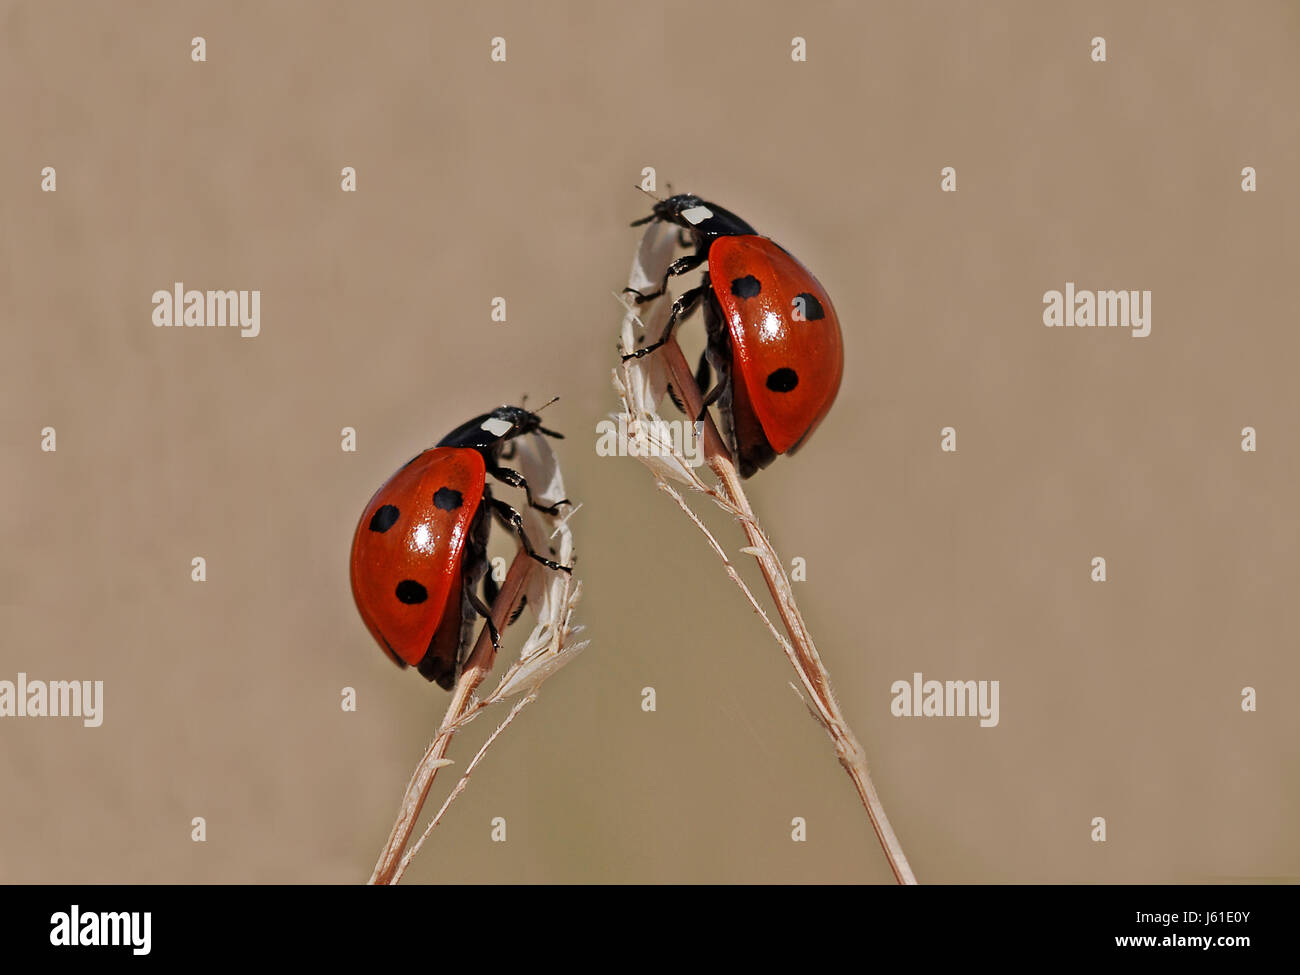 insect beetle dots red ladybug insect beetle photo composition dots rise climb Stock Photo